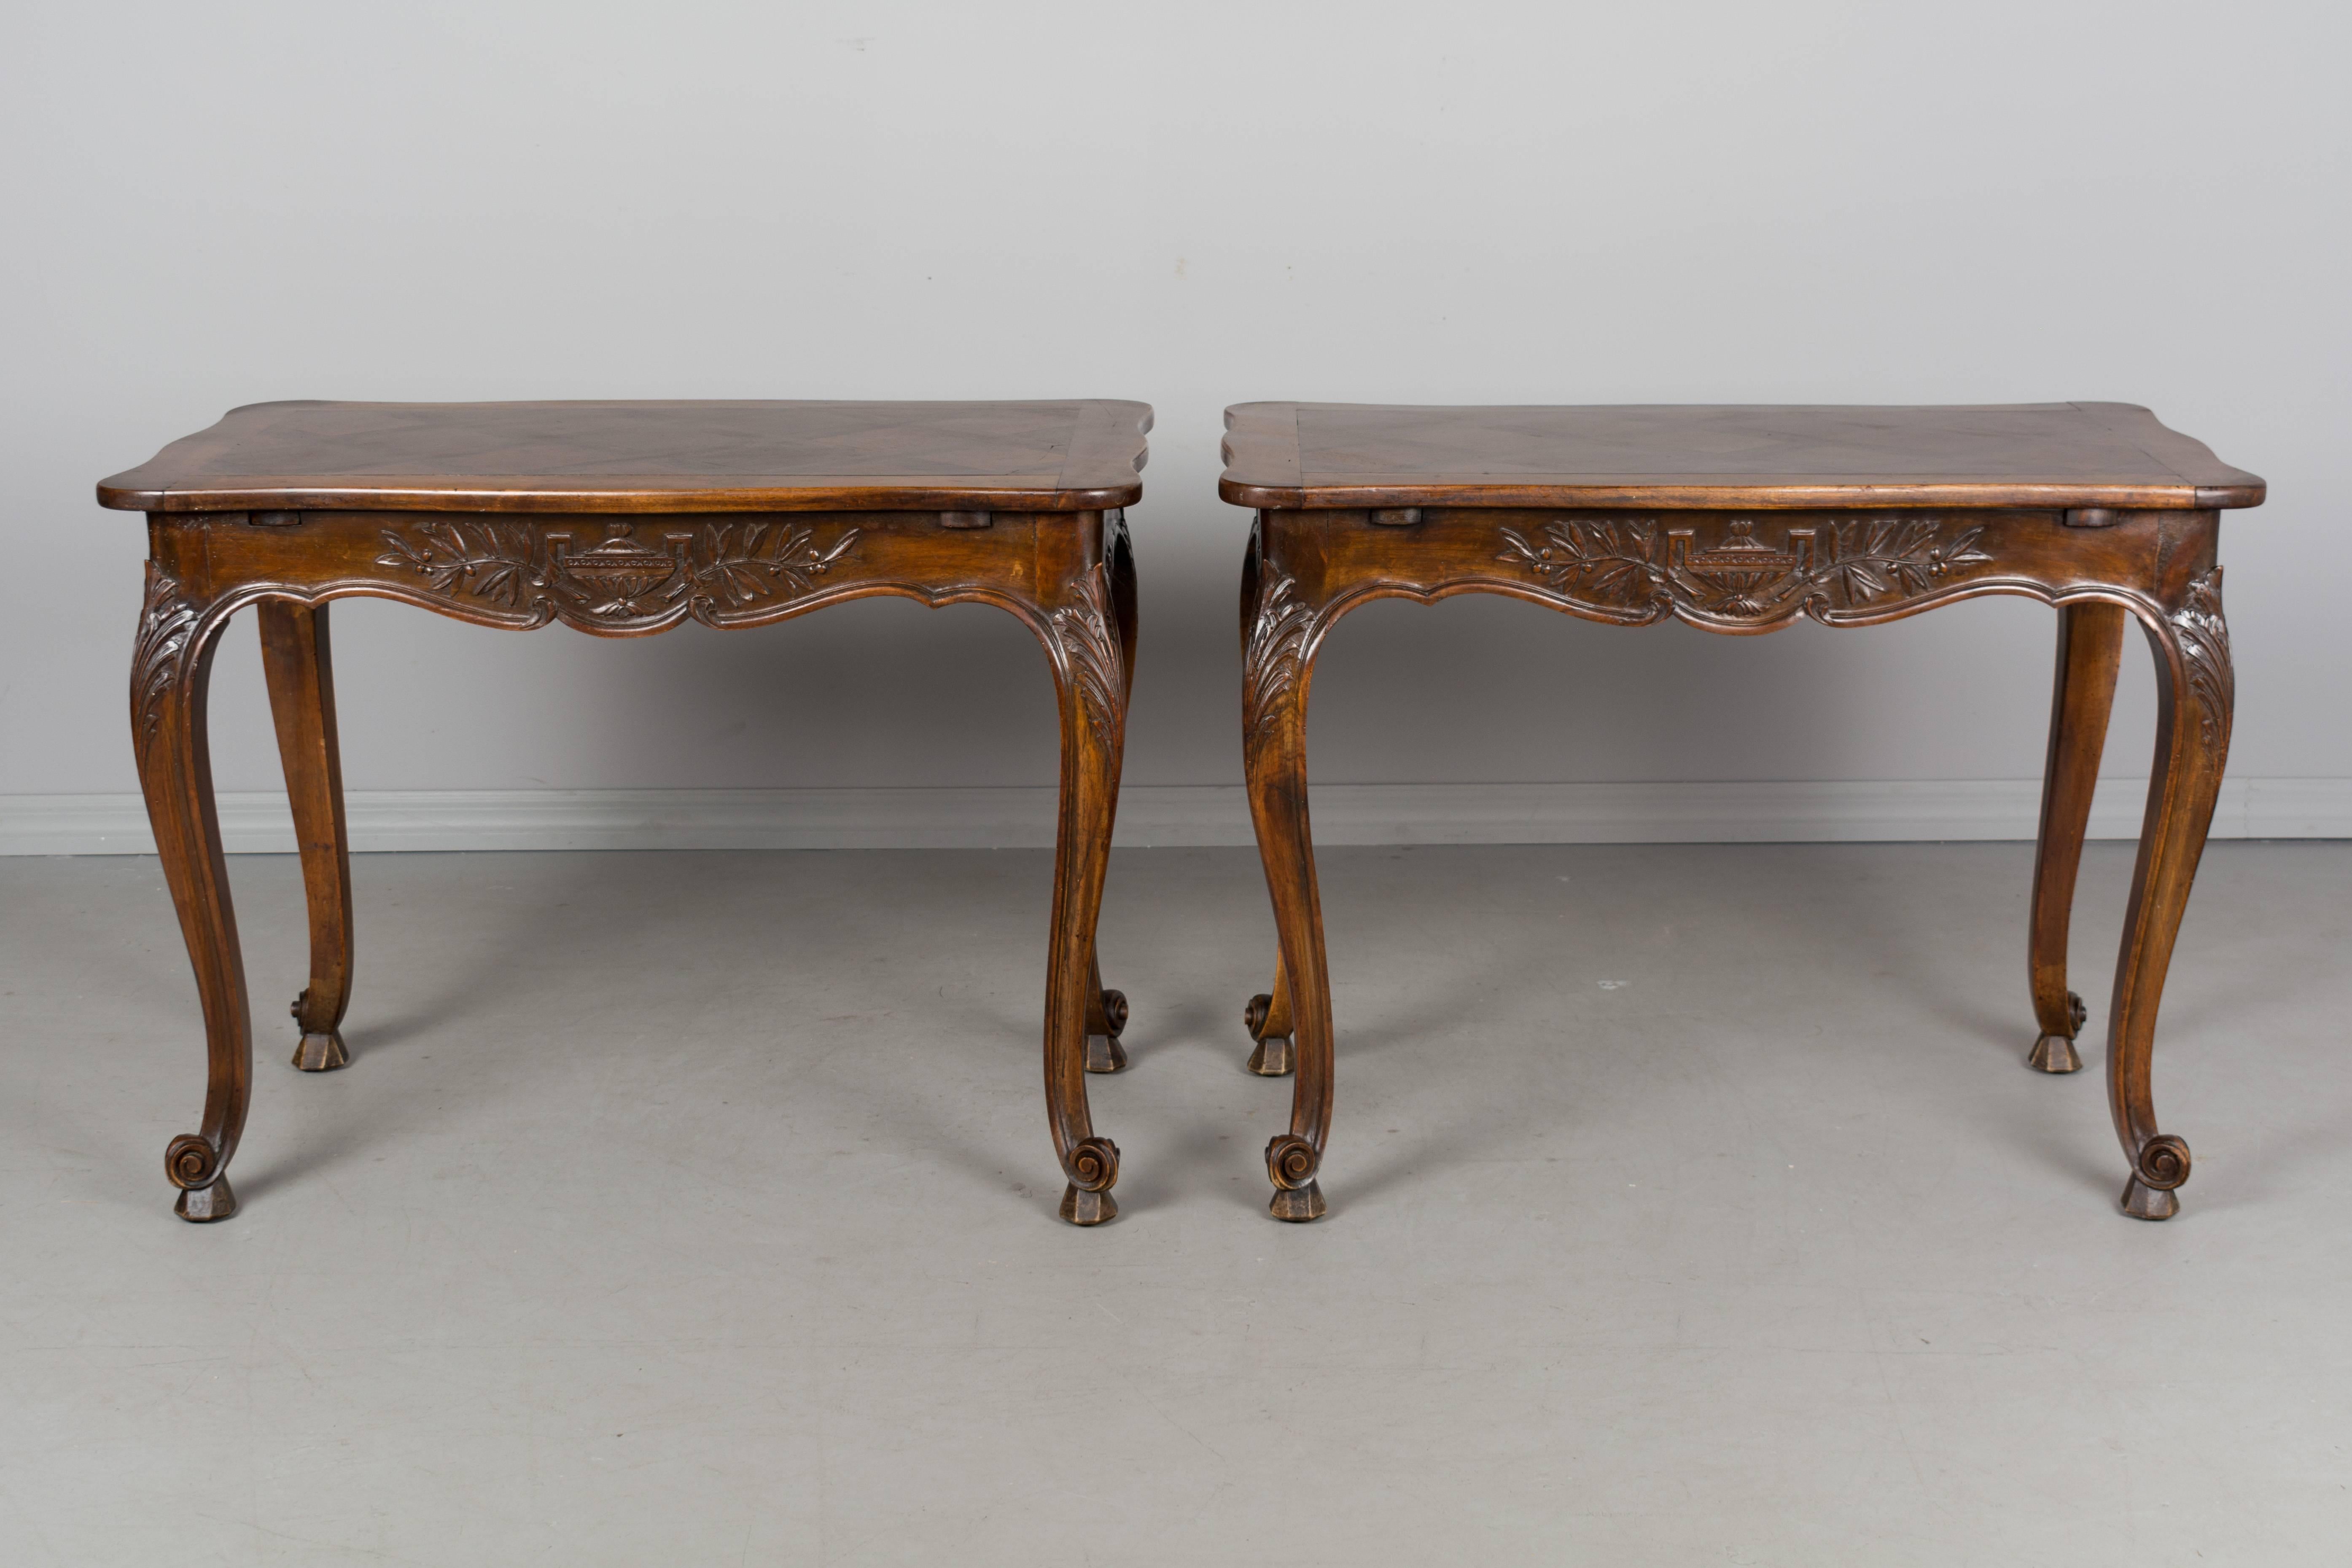 A pair of 19th century French Louis XV style parquet top tables from Provence. Made of solid walnut and veneer of walnut with waxed finish. Nice carved relief of an urn with olive branches on the apron of both sides. Curved legs with large carved